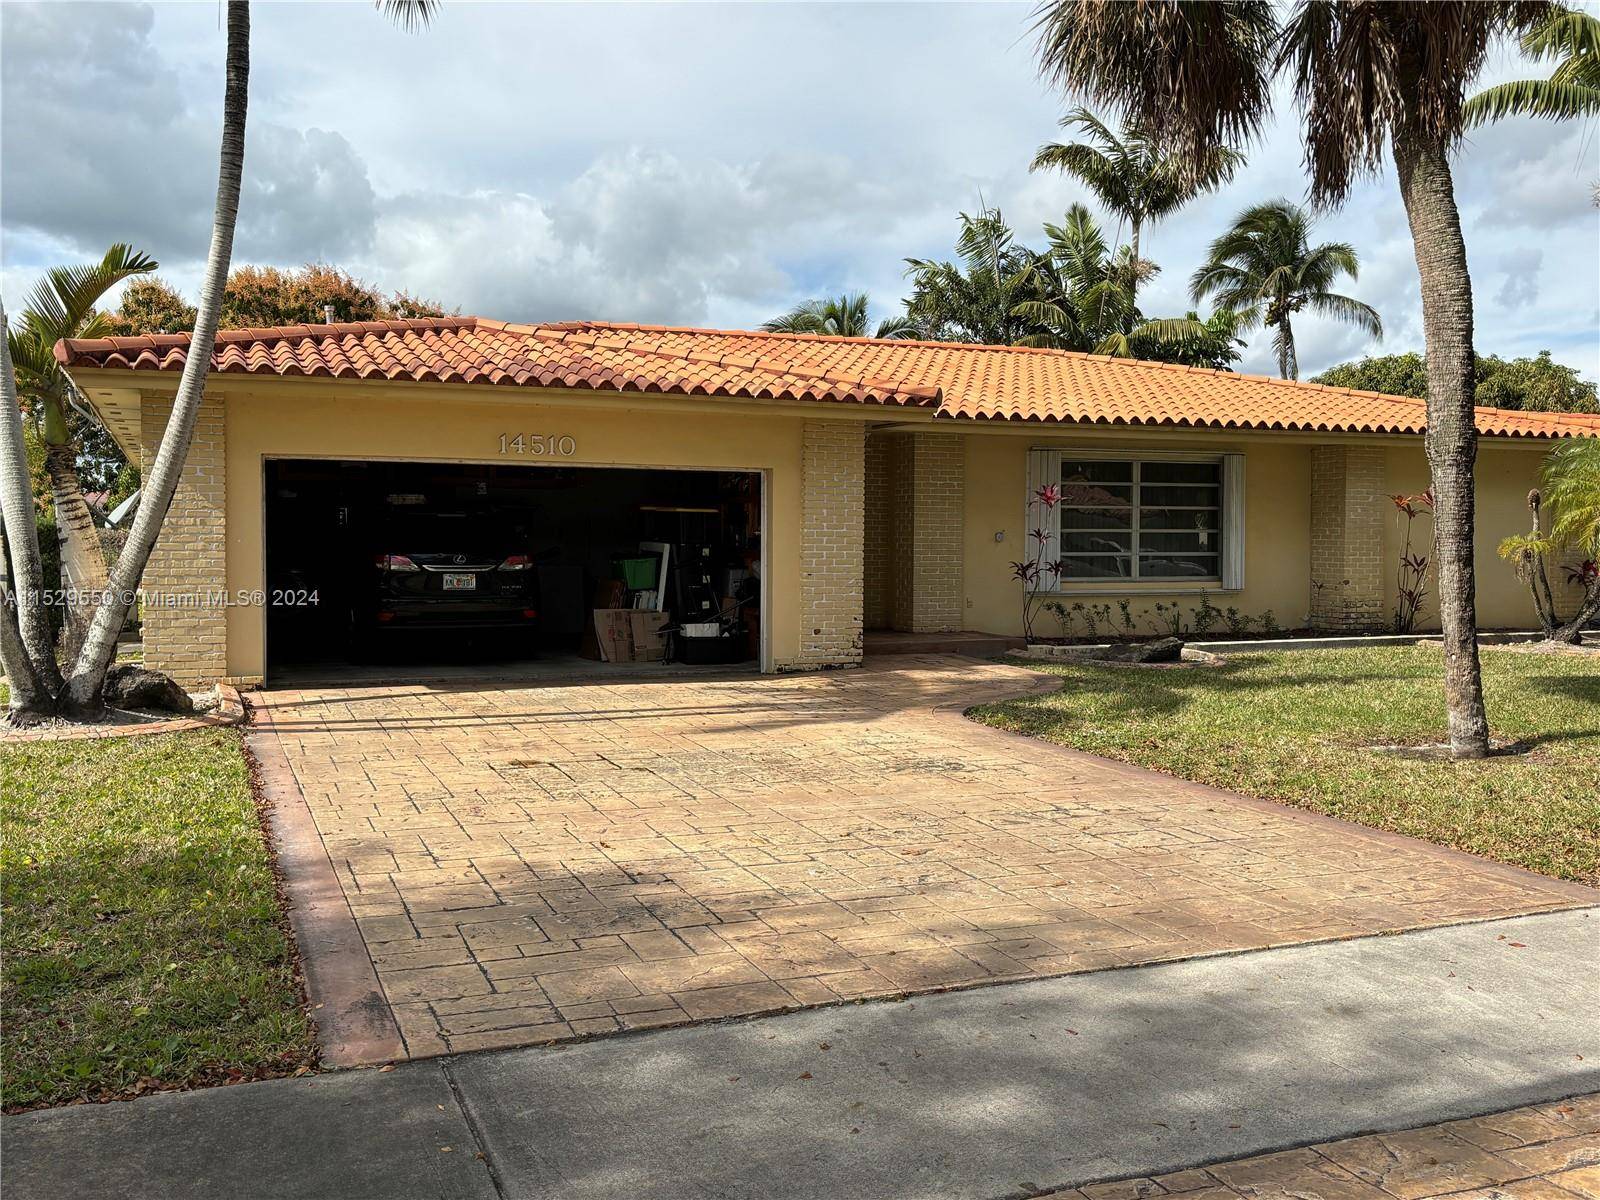 BACK ON THE MARKET, PRICE REDUCED 75K TO SELL, MIAMI LAKES LAKEFRONT 4 BEDROOM HOME, 2 CAR GARAGE, FAMILY AND FLORIDA ROOM, INCREDIBLE LOCATION IN QUIET STREET, A FEW BLOCKS ...